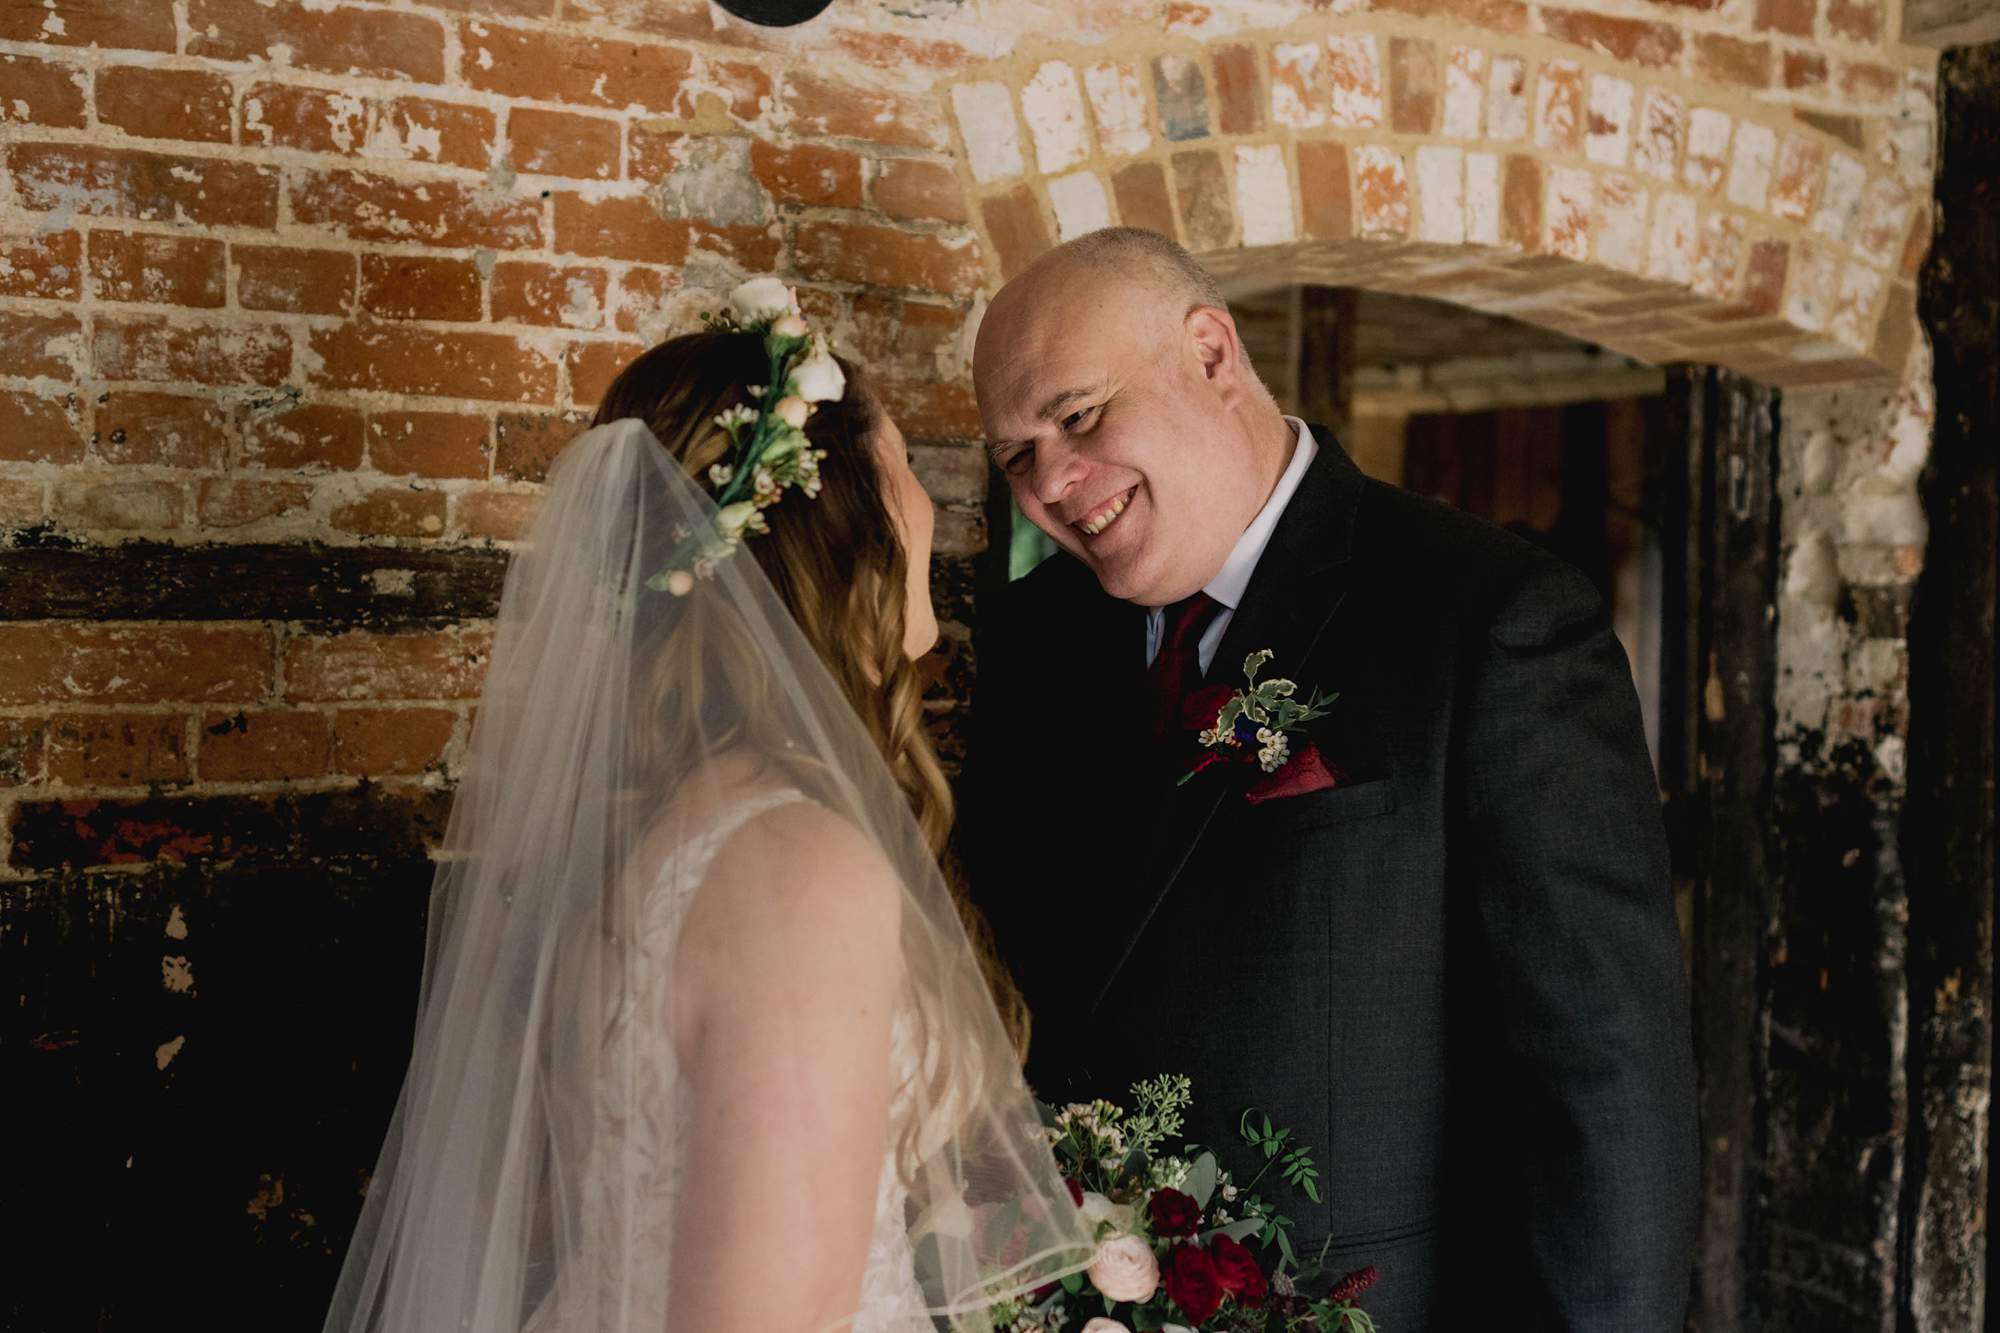 First look between a bride and her father on a wedding day at the Clock Barn venue in Hampshire.